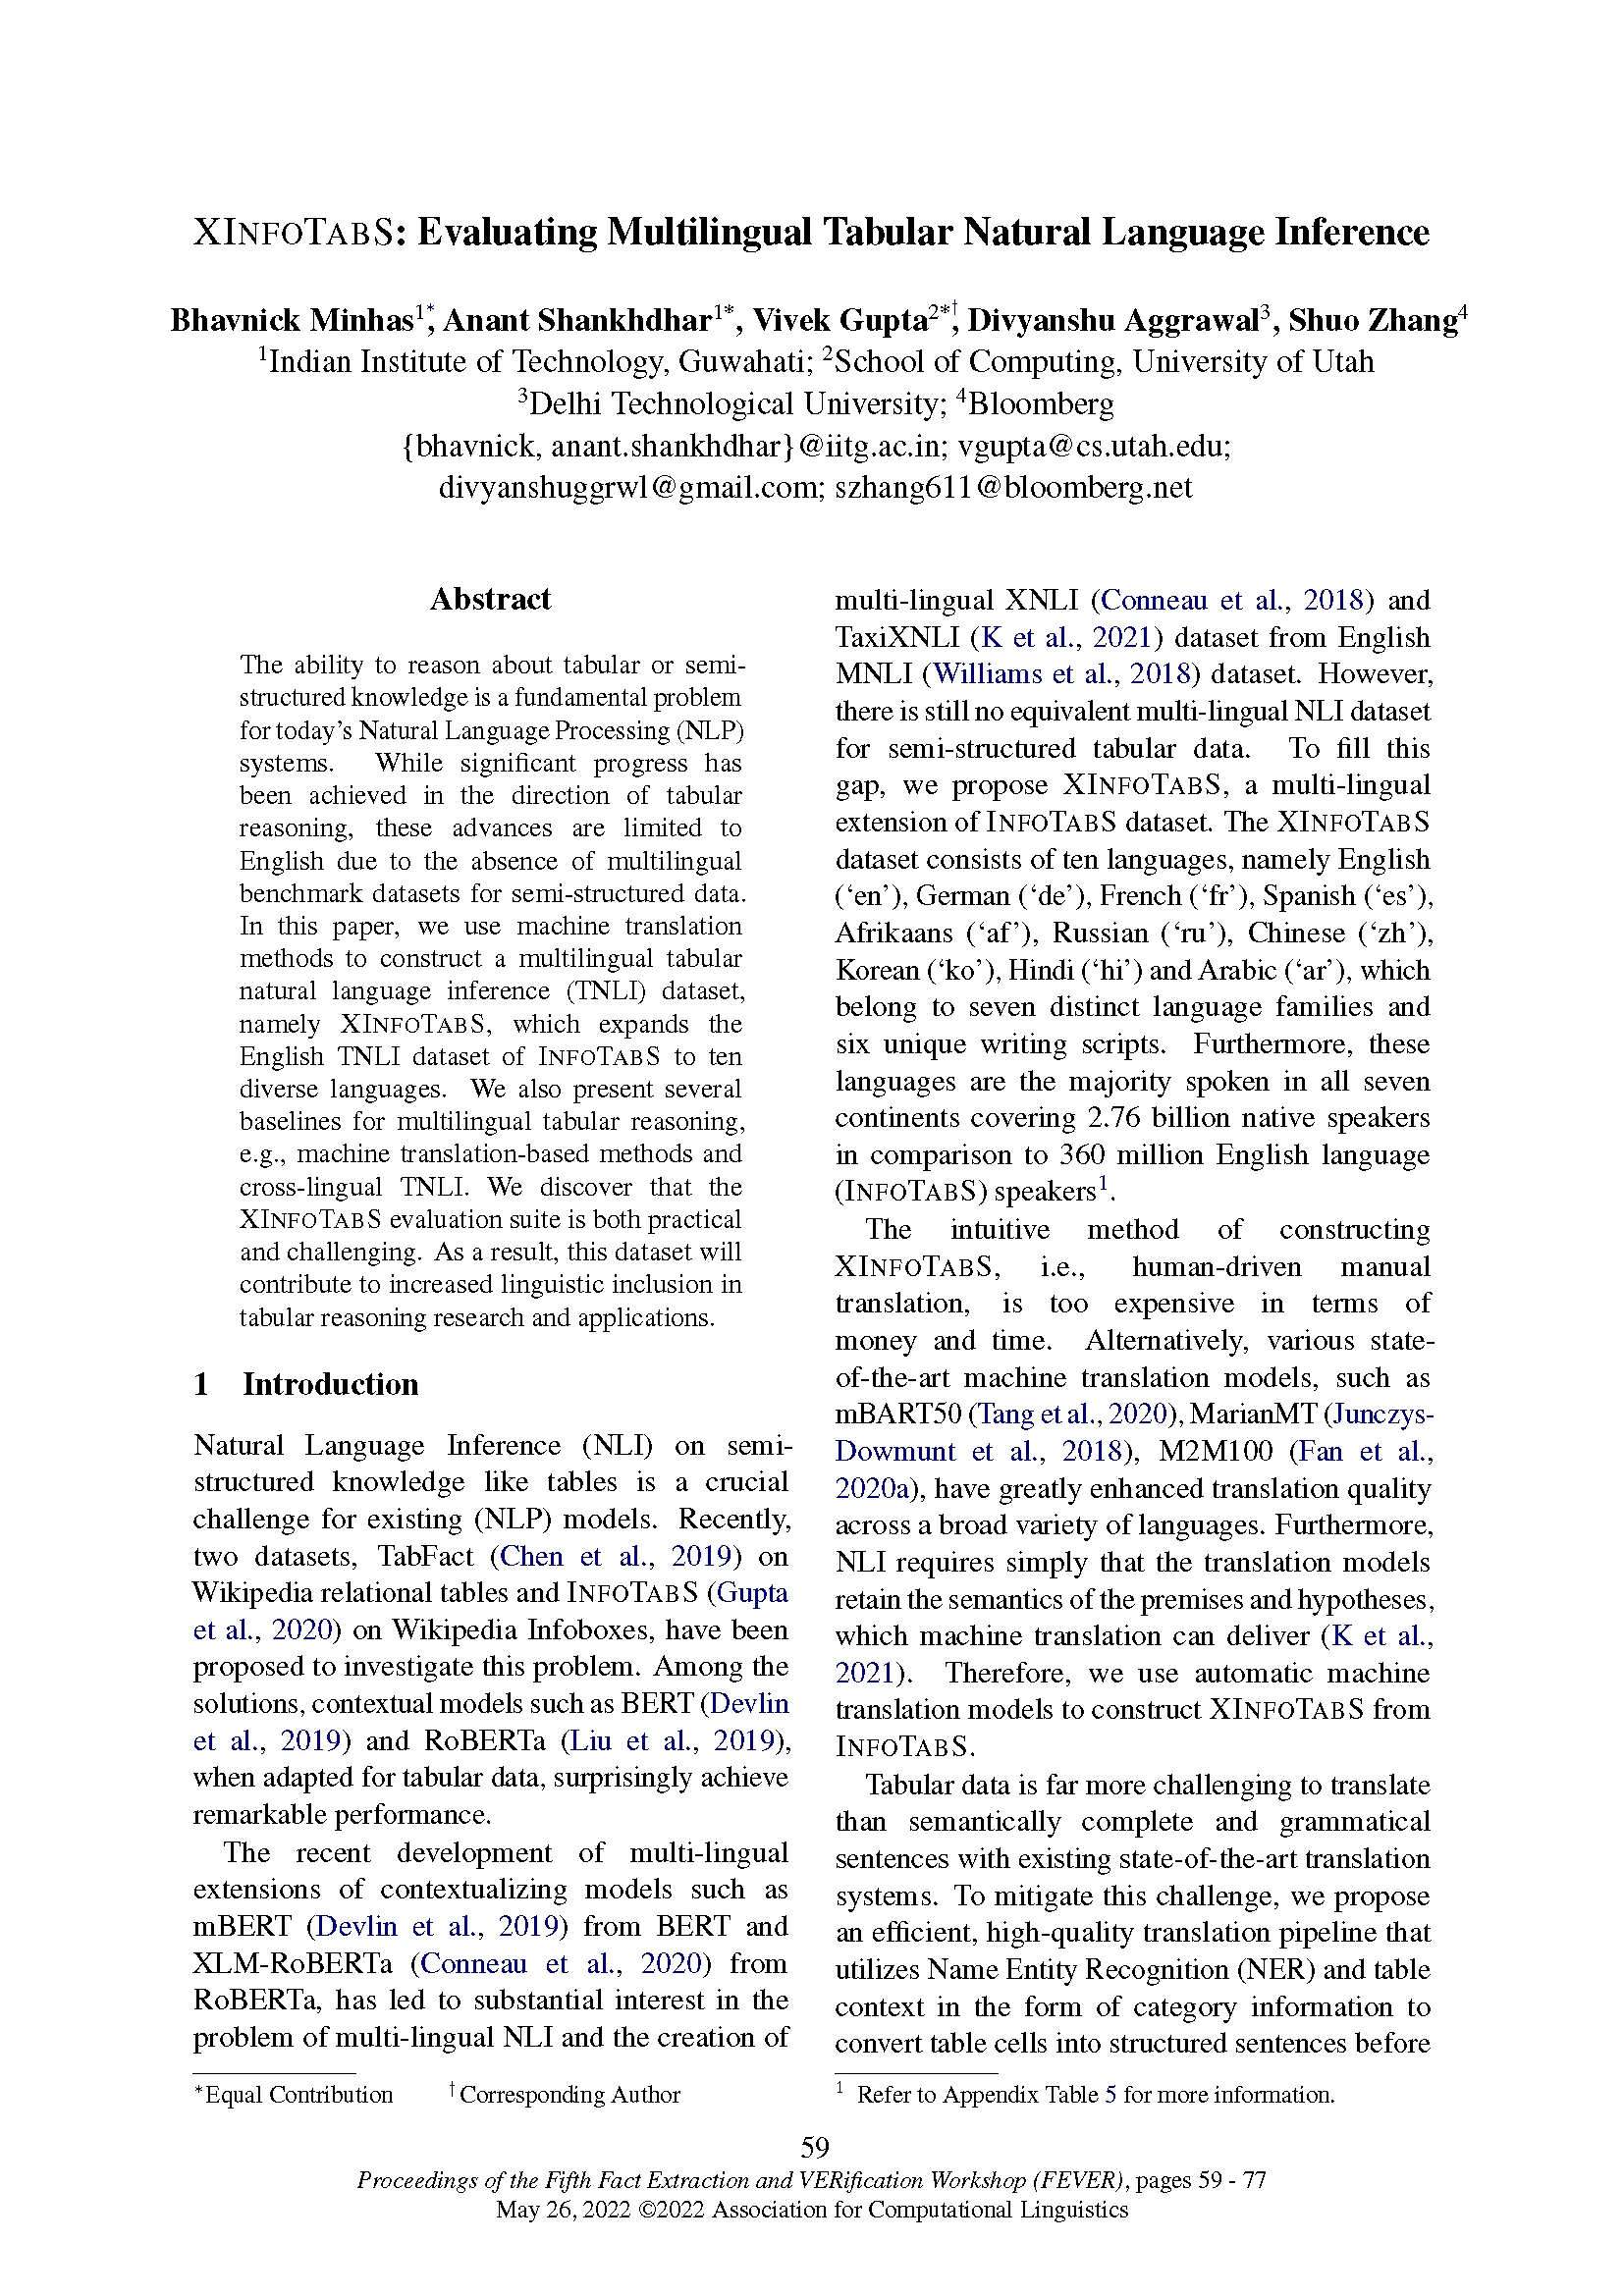 Front page of paper published during the Fact Extraction and VERification (FEVER) Workshop at ACL 2022 titled "XInfoTabS: Evaluating Multilingual Tabular Natural Language Inference."